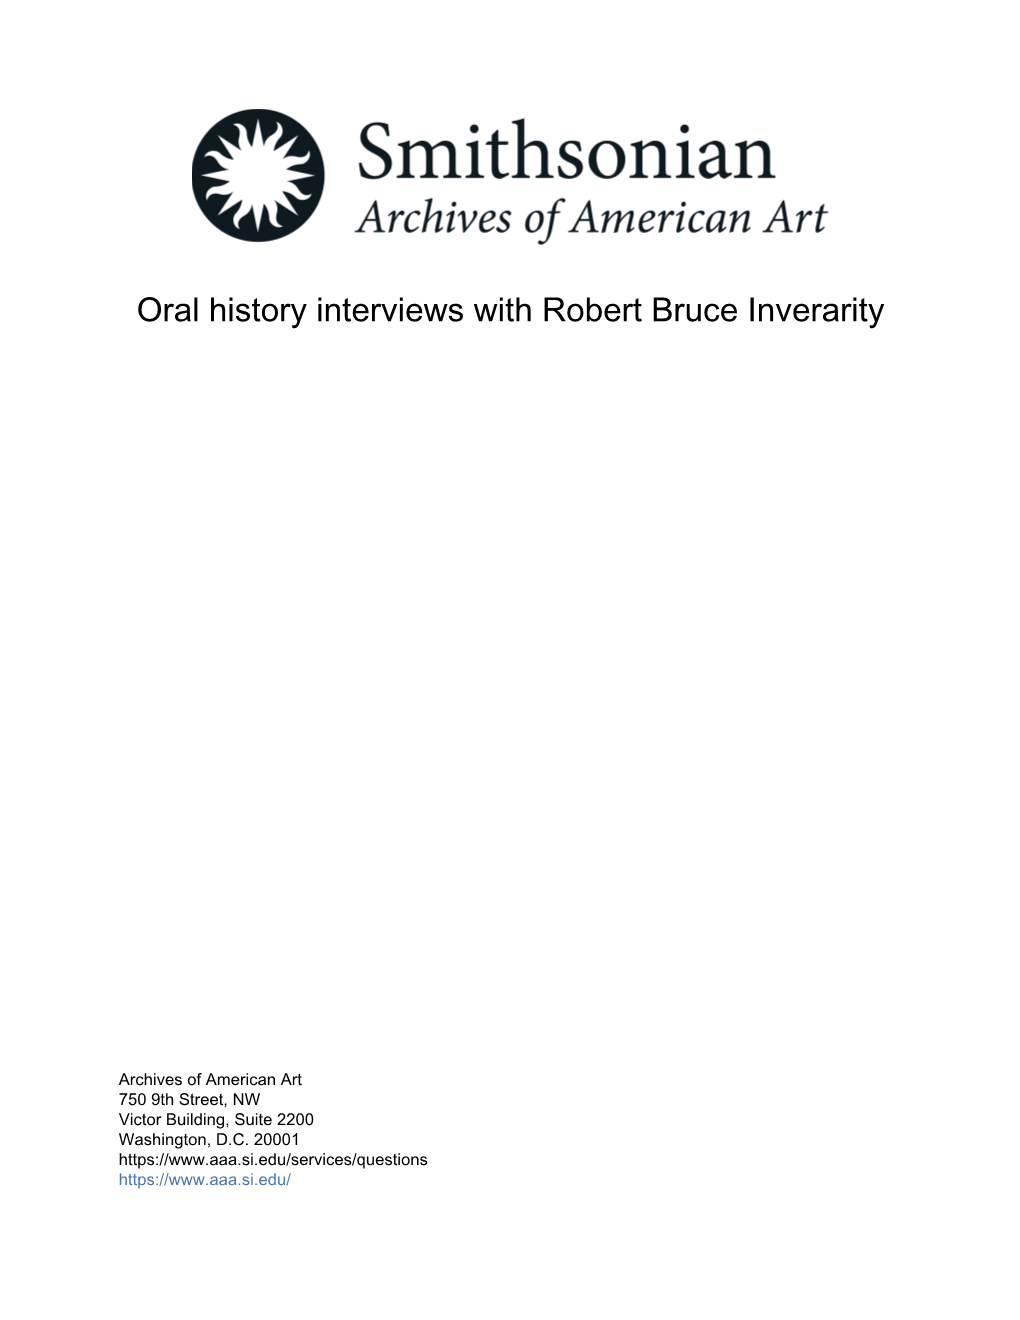 Oral History Interviews with Robert Bruce Inverarity